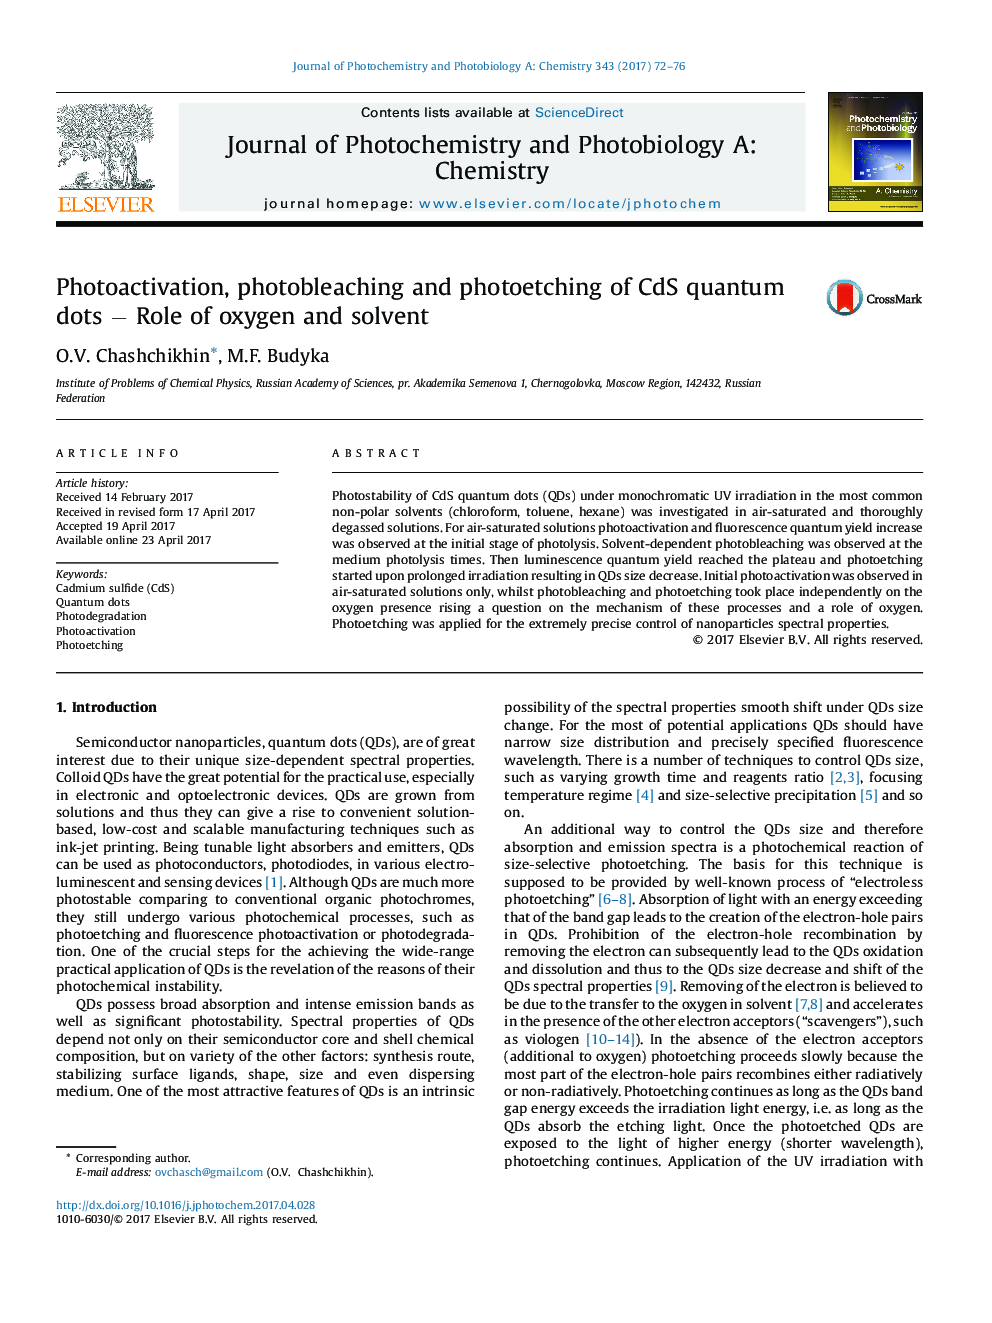 Photoactivation, photobleaching and photoetching of CdS quantum dots â Role of oxygen and solvent